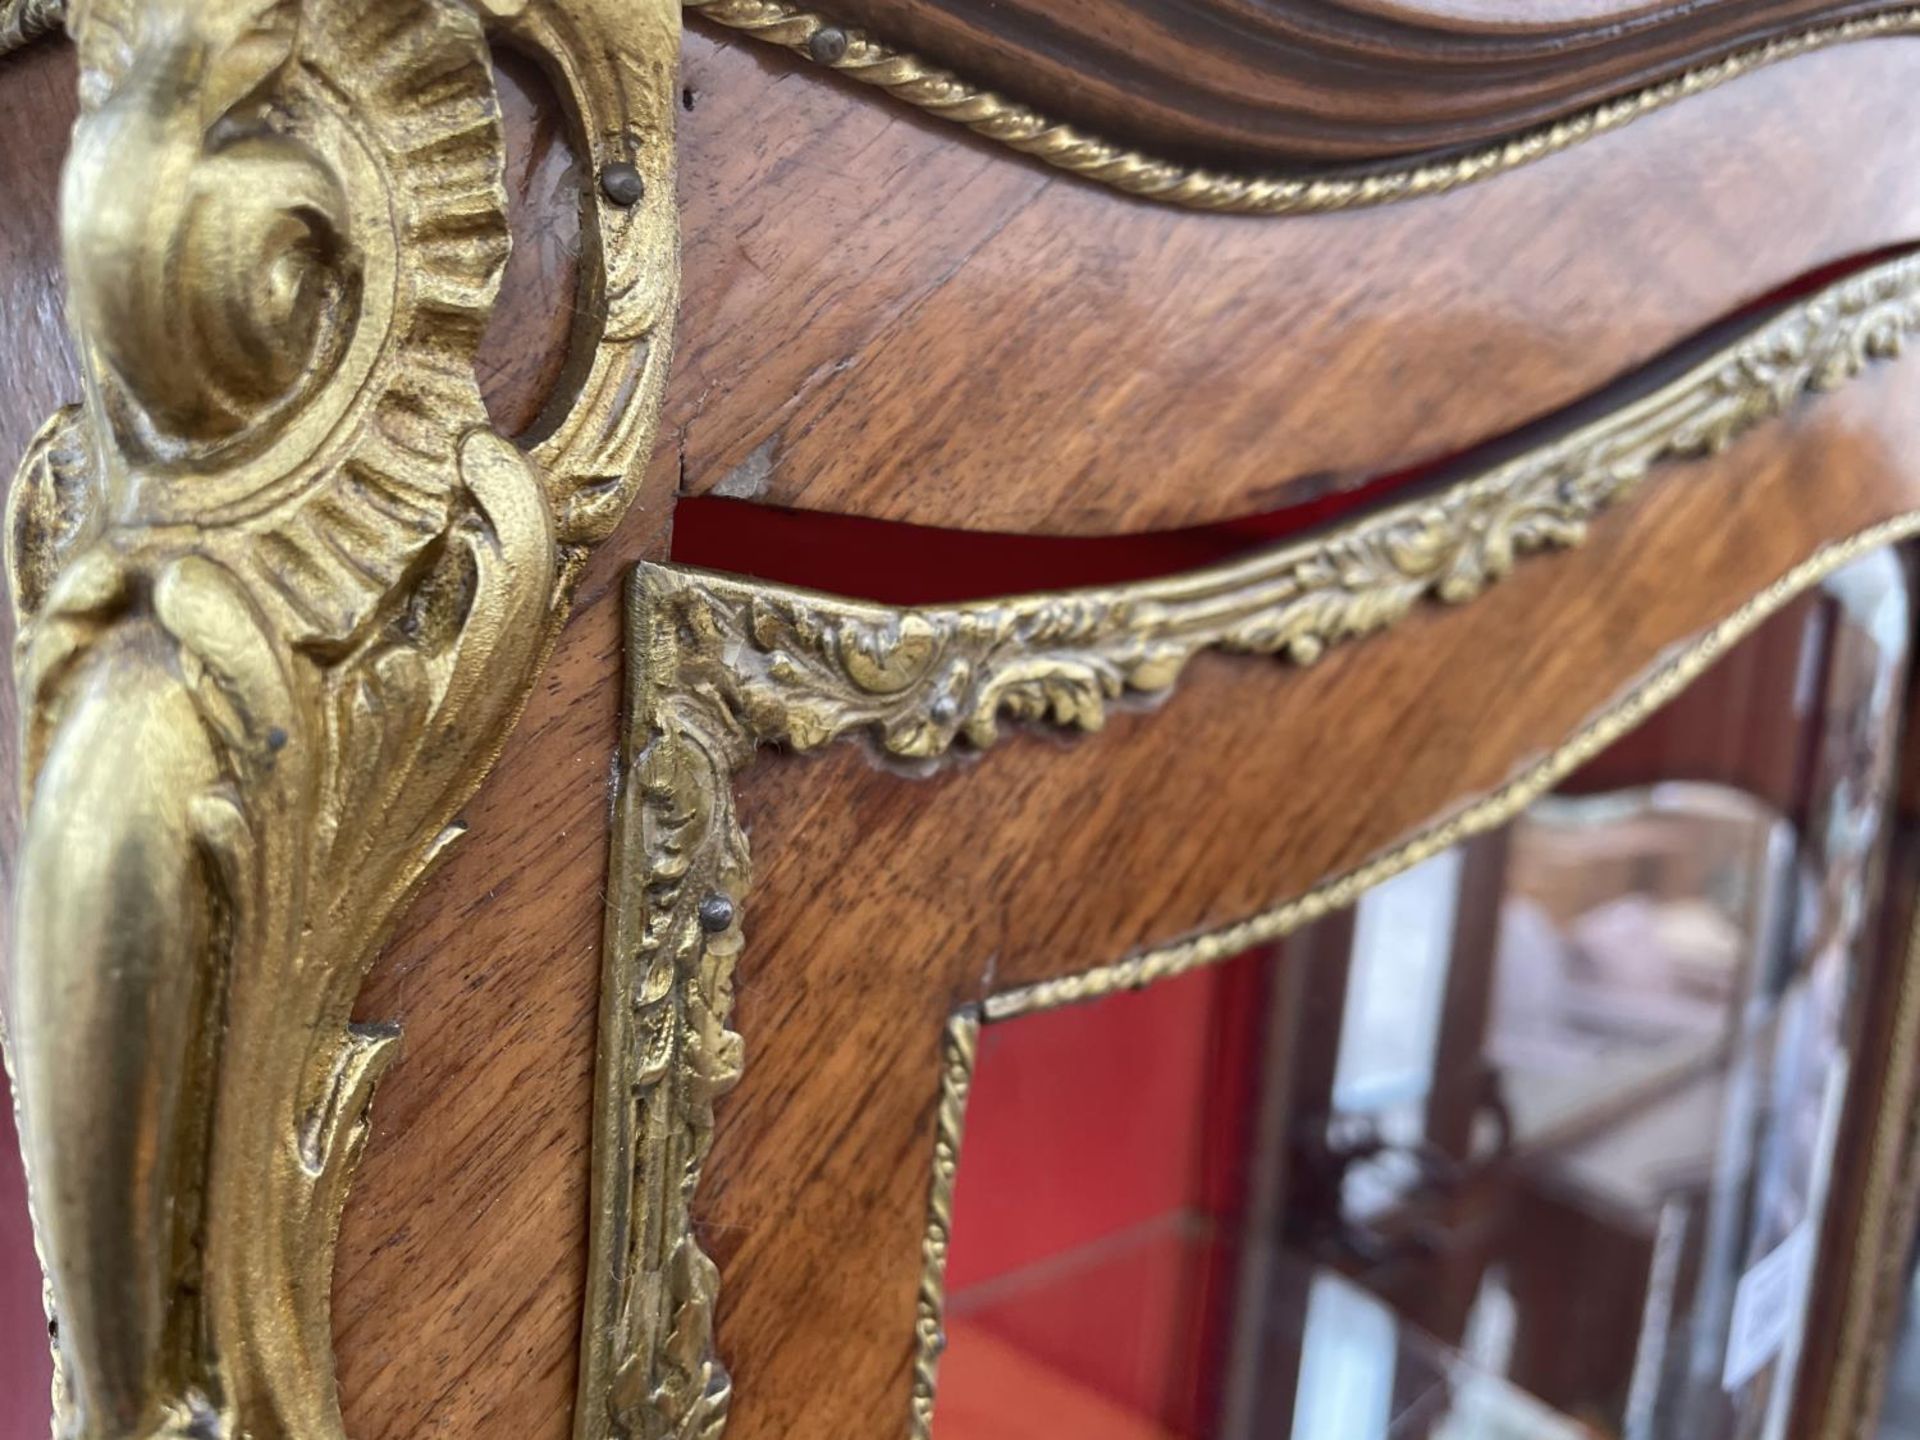 A LOUIS XVI STYLE WALNUT BOWFRONTED DISPLAY CABINET WITH PAINTED PANELS AND APPLIED GILT METAL - Image 3 of 8